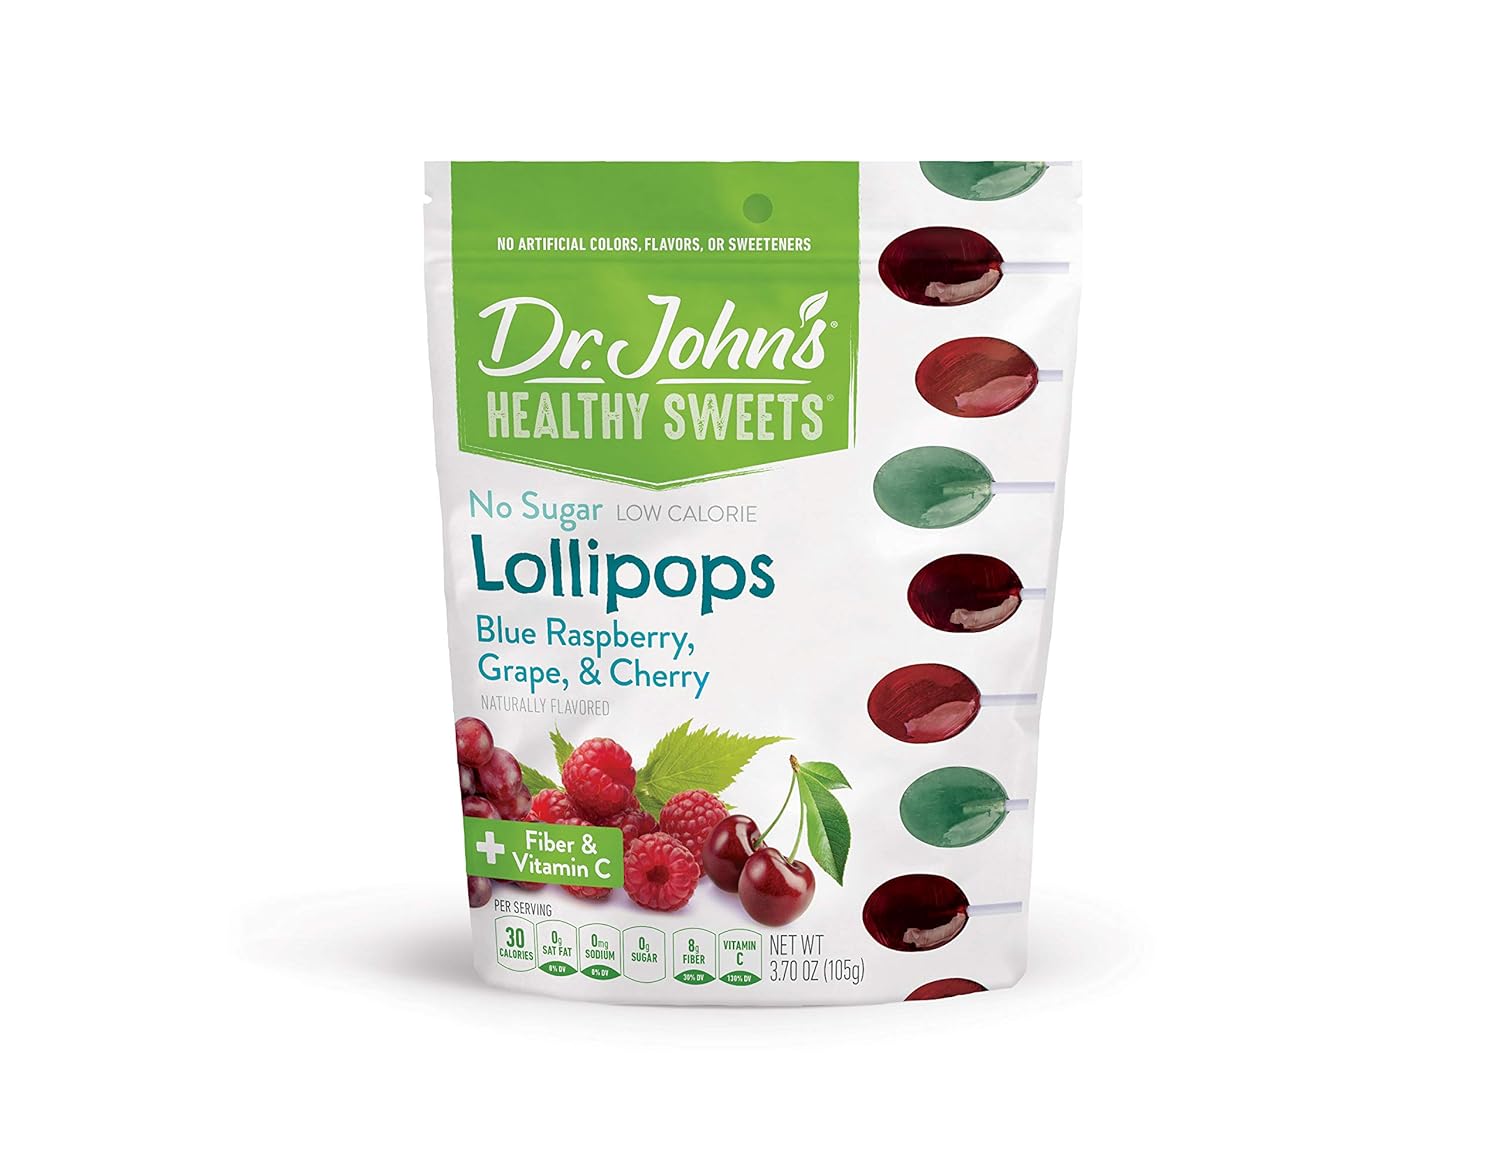  Dr. Johns Healthy Sweets Sugar-Free Classic Fruit Oval Lollipops (14 count, 3.7 OZ)